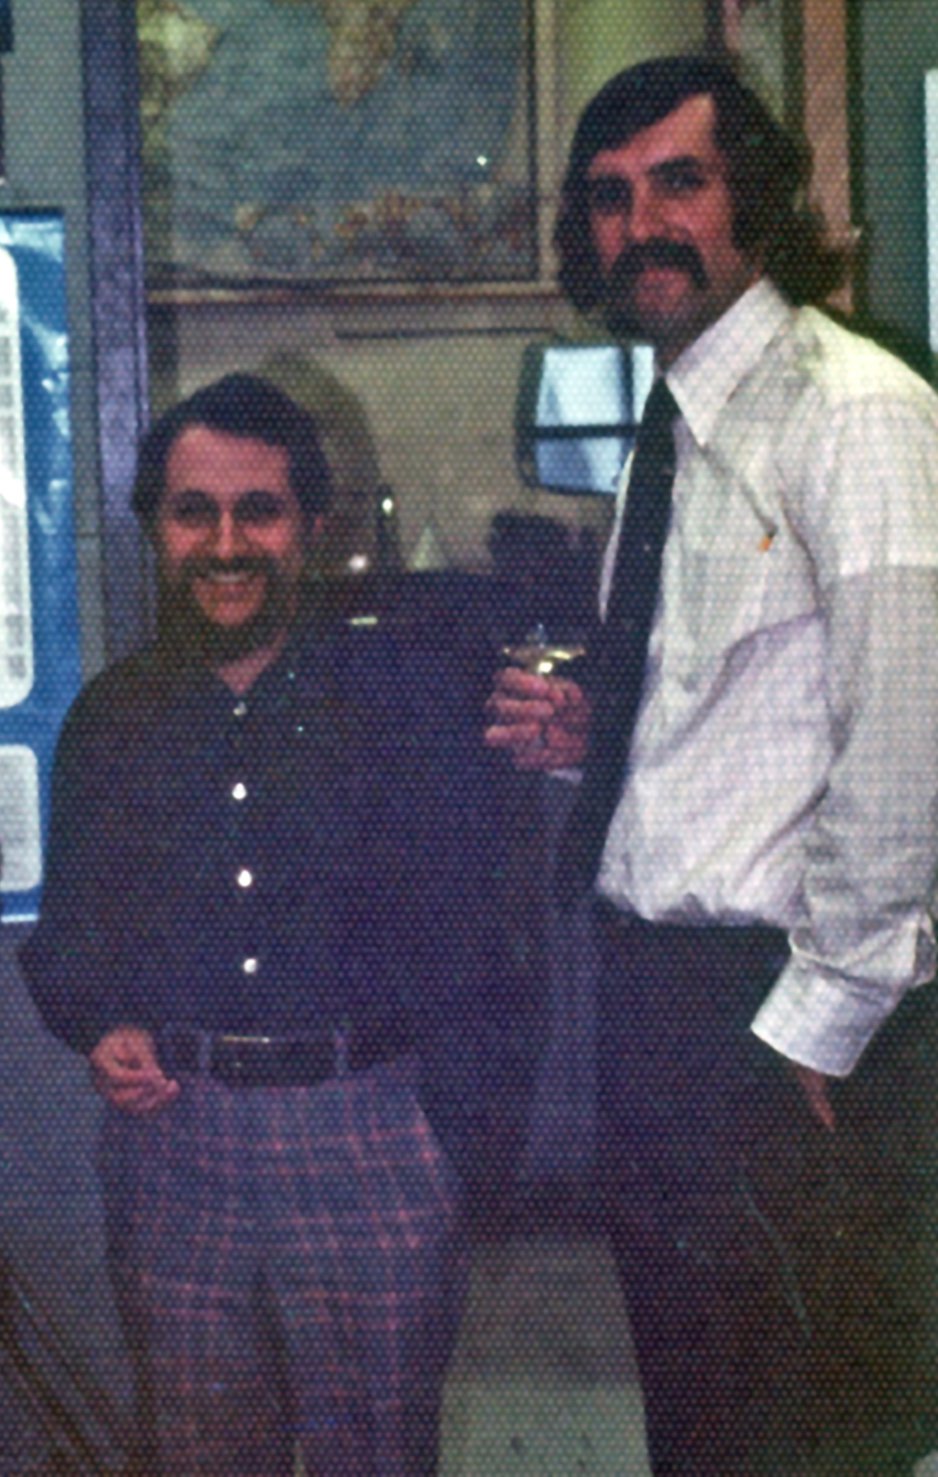 Peter Robison (right) with Dick Levy, professor emeritus of biology, at Robison’s doctoral defense in 1978.